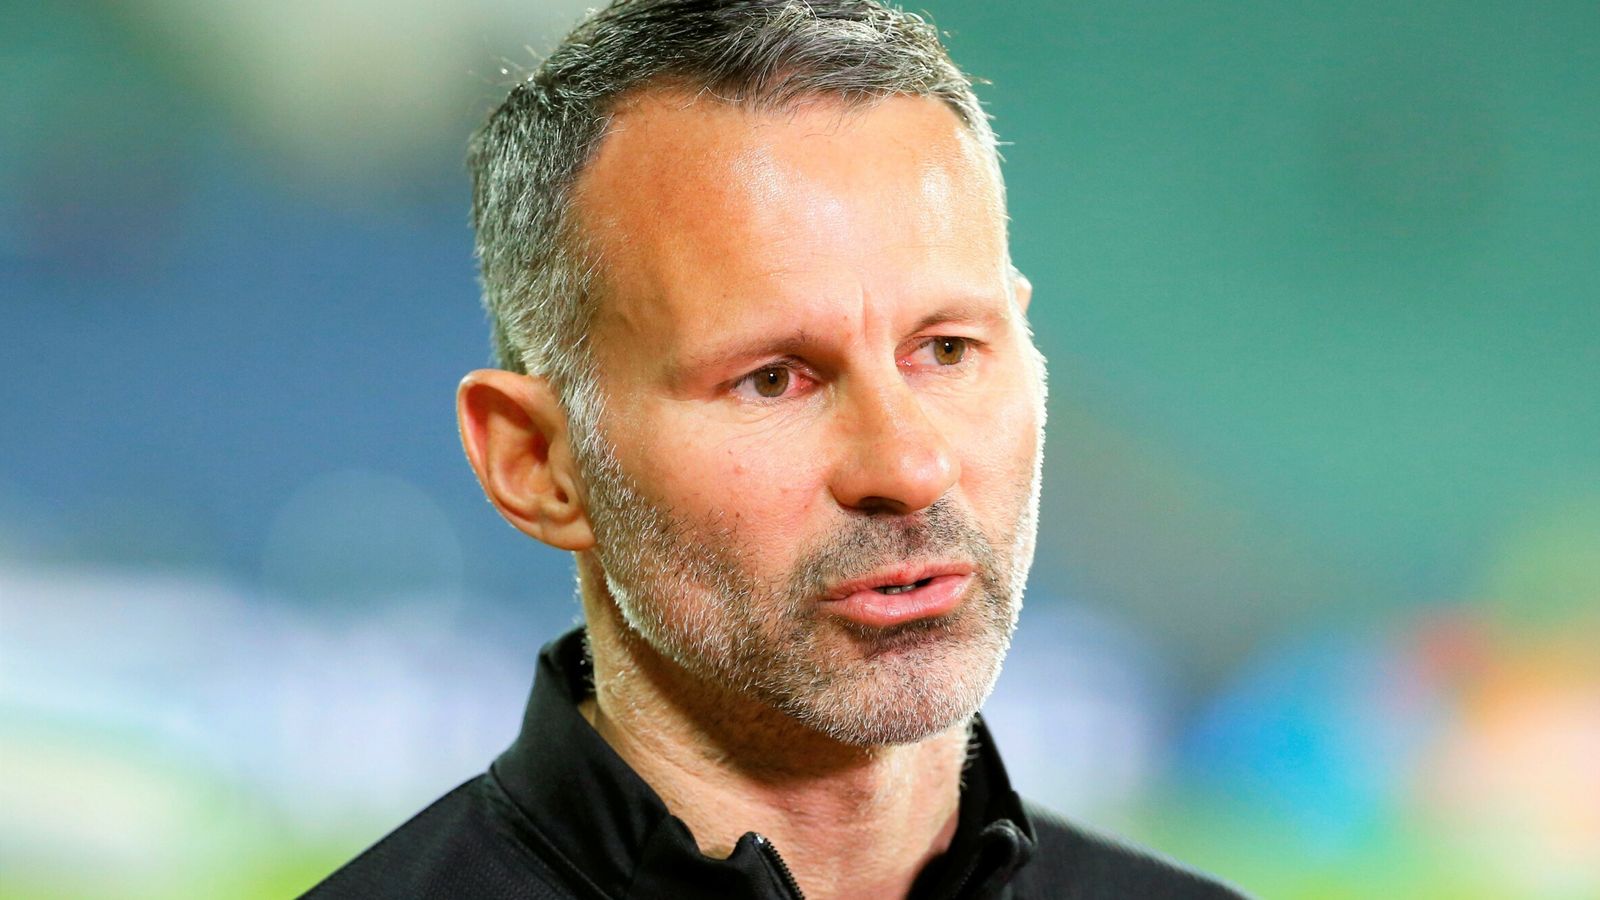 Ryan Giggs: Wales manager to stand down from role